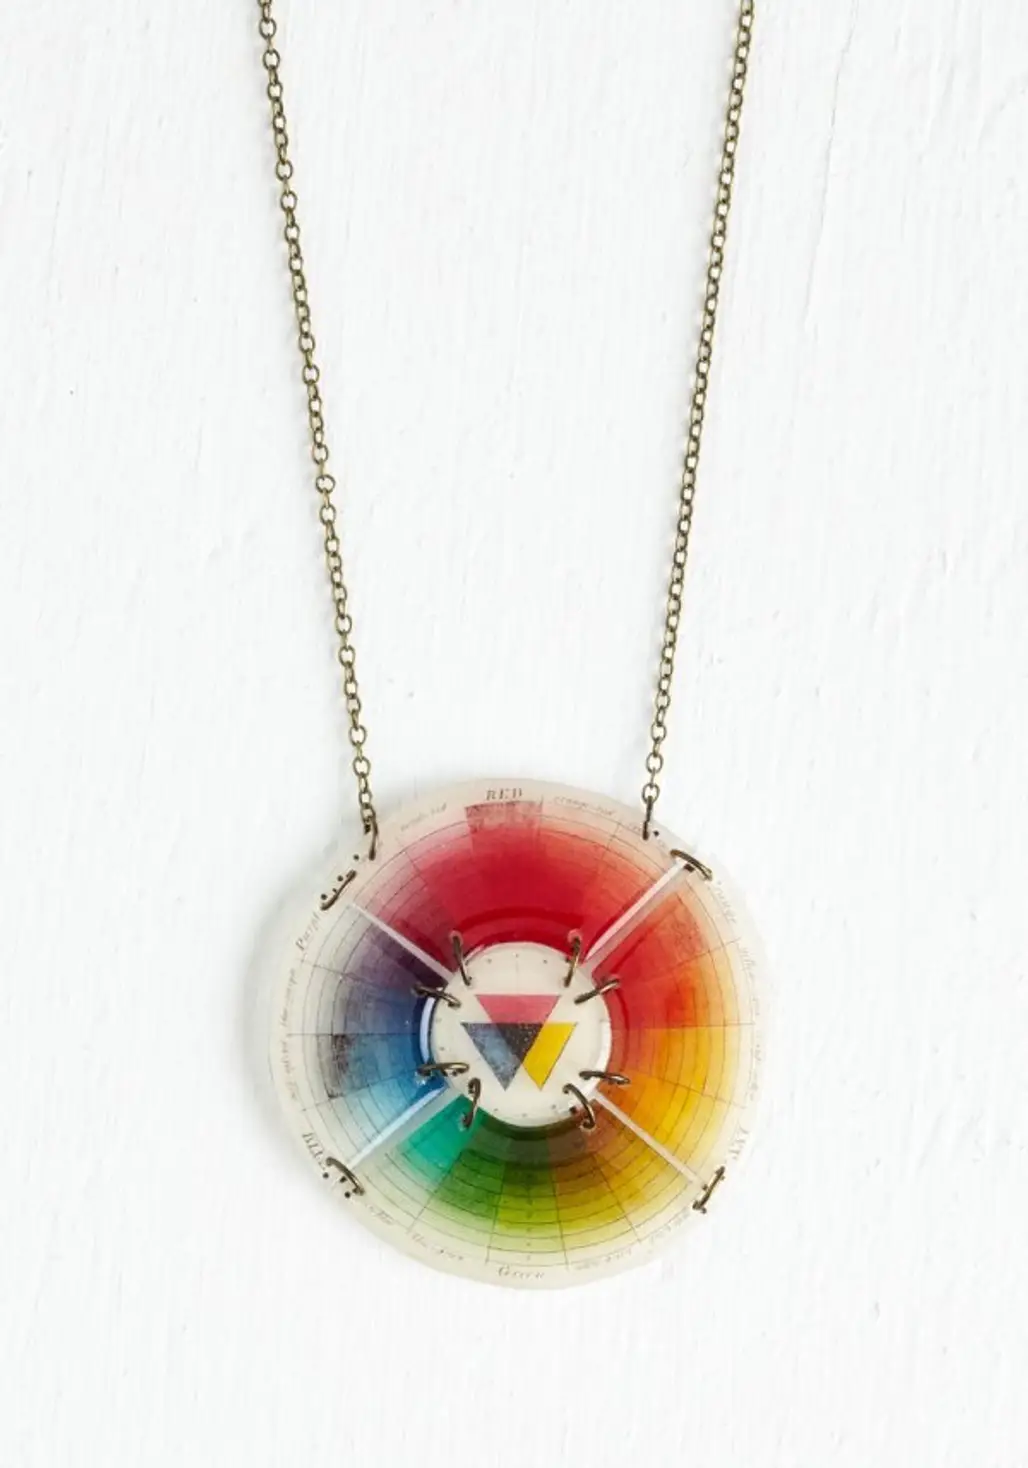 Take a Tint Necklace